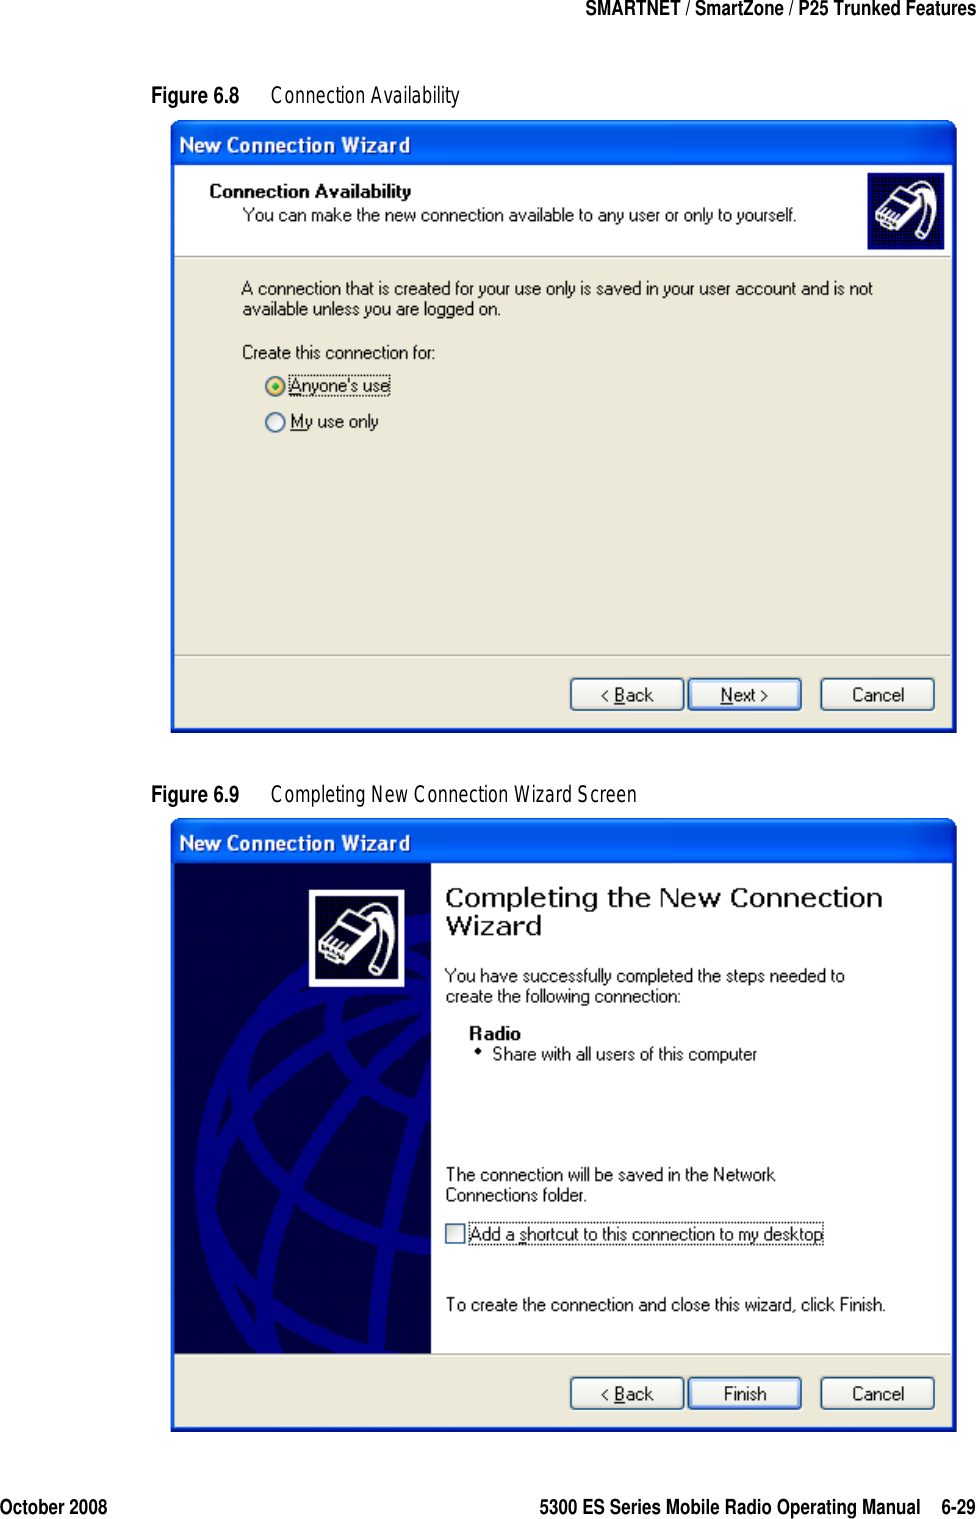 October 2008 5300 ES Series Mobile Radio Operating Manual 6-29SMARTNET / SmartZone / P25 Trunked FeaturesFigure 6.8 Connection AvailabilityFigure 6.9 Completing New Connection Wizard Screen